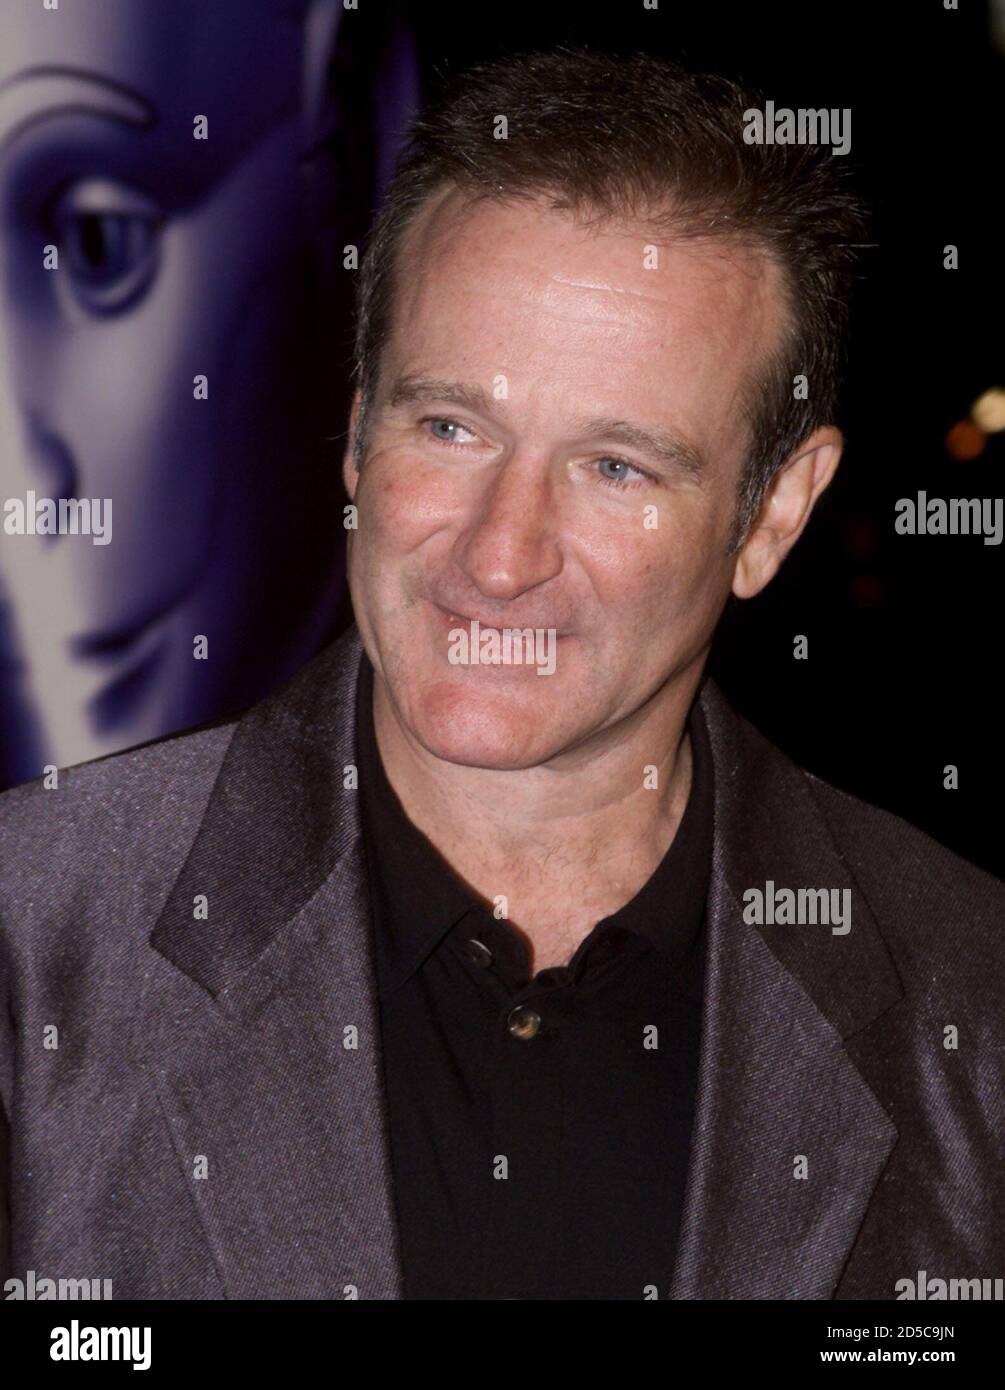 Takke duft Læs Actor Robin Williams poses at the premiere of the new film "Bicentennial Man"  December 13 in Hollywood. [The film is about a futuristic family and their  personal robot and opens December 17